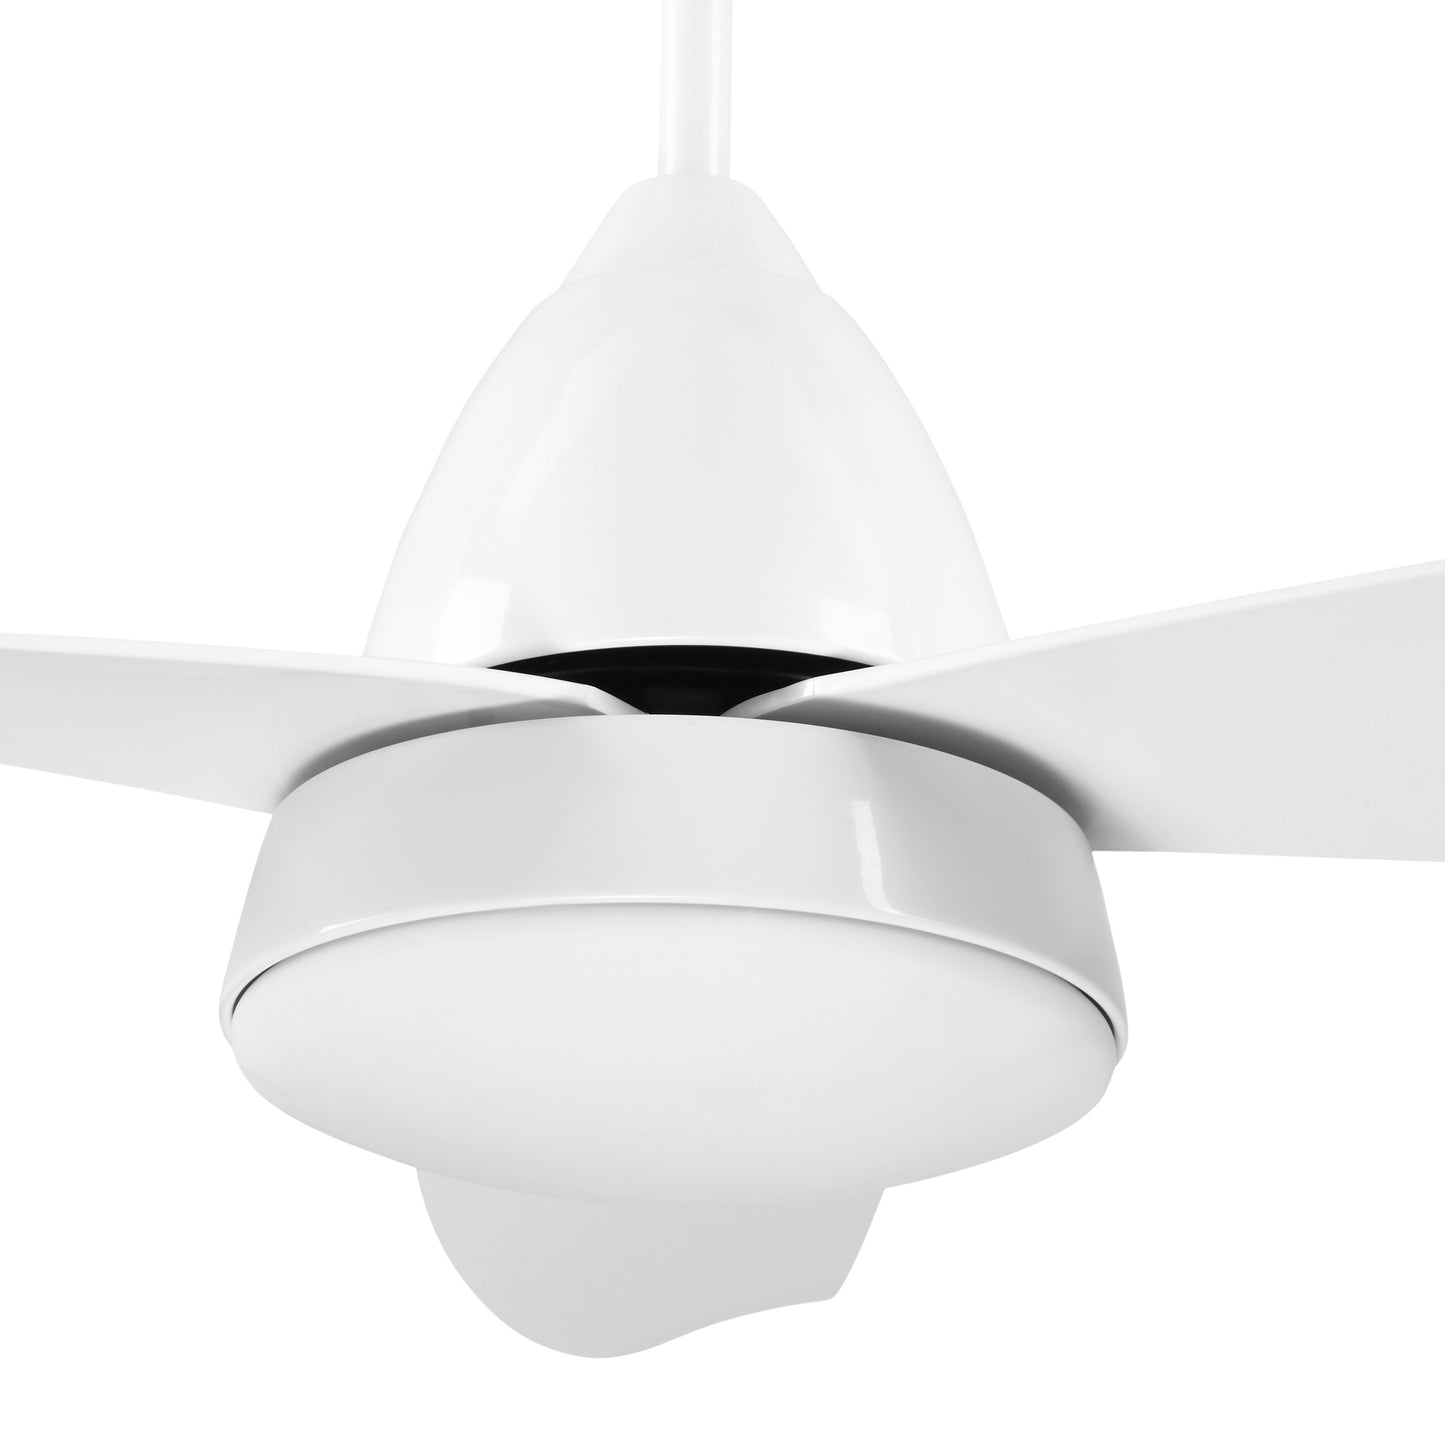 HOMCOM Reversible Ceiling Fan with Light, 3 Blades Indoor Modern Mount White LED Lighting Fan with Remote Controller, for Bedroom, Living Room, White